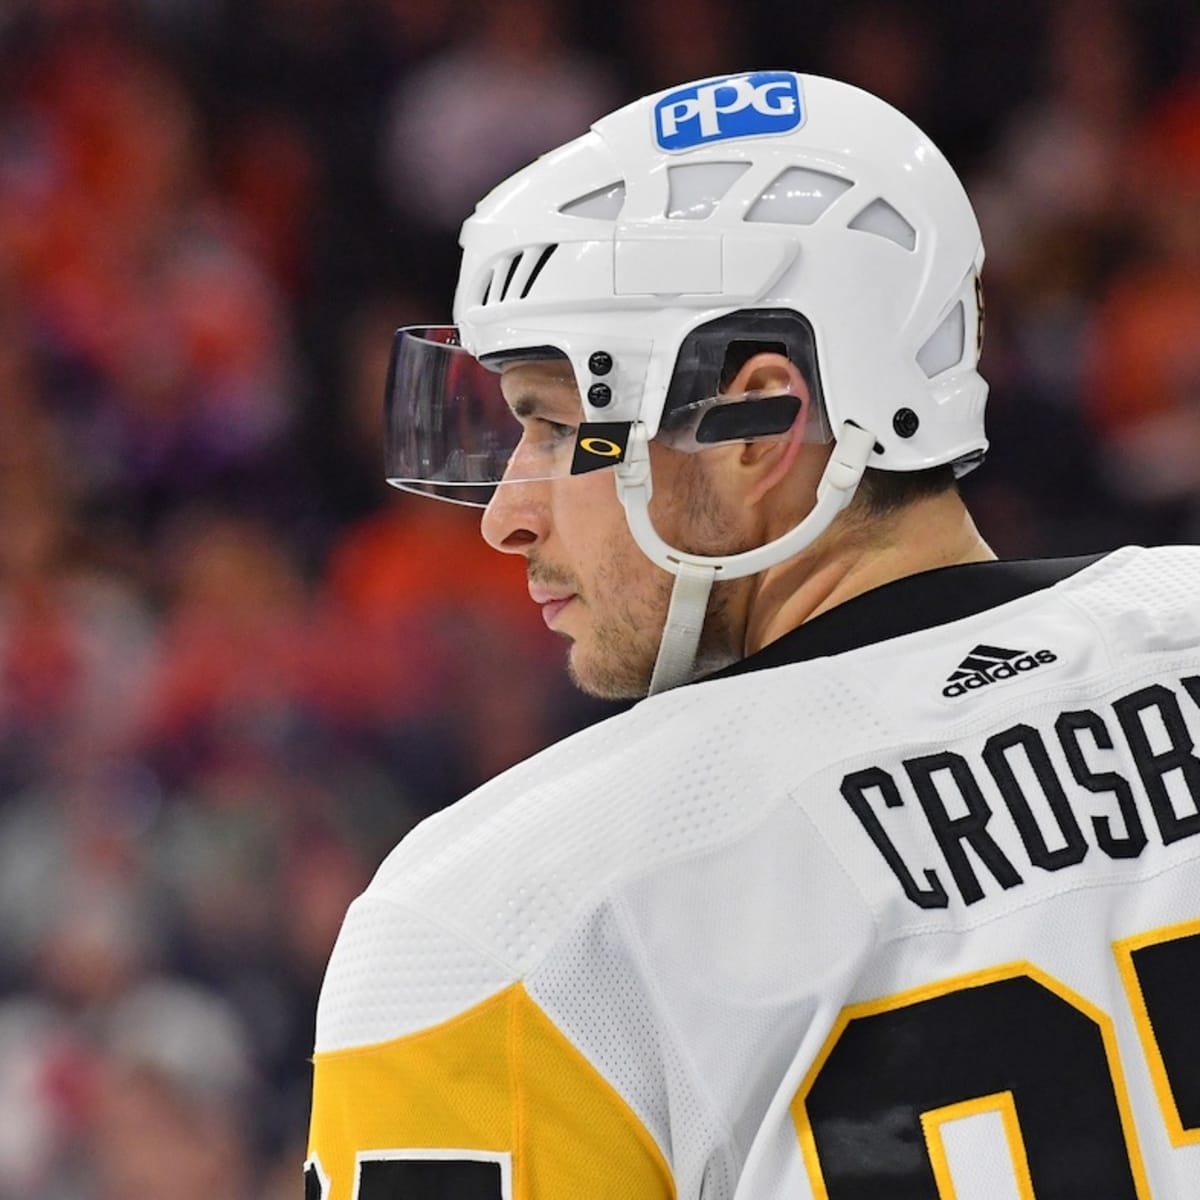 Penguins captain Sidney Crosby ruled out for Game 6 with upper-body injury